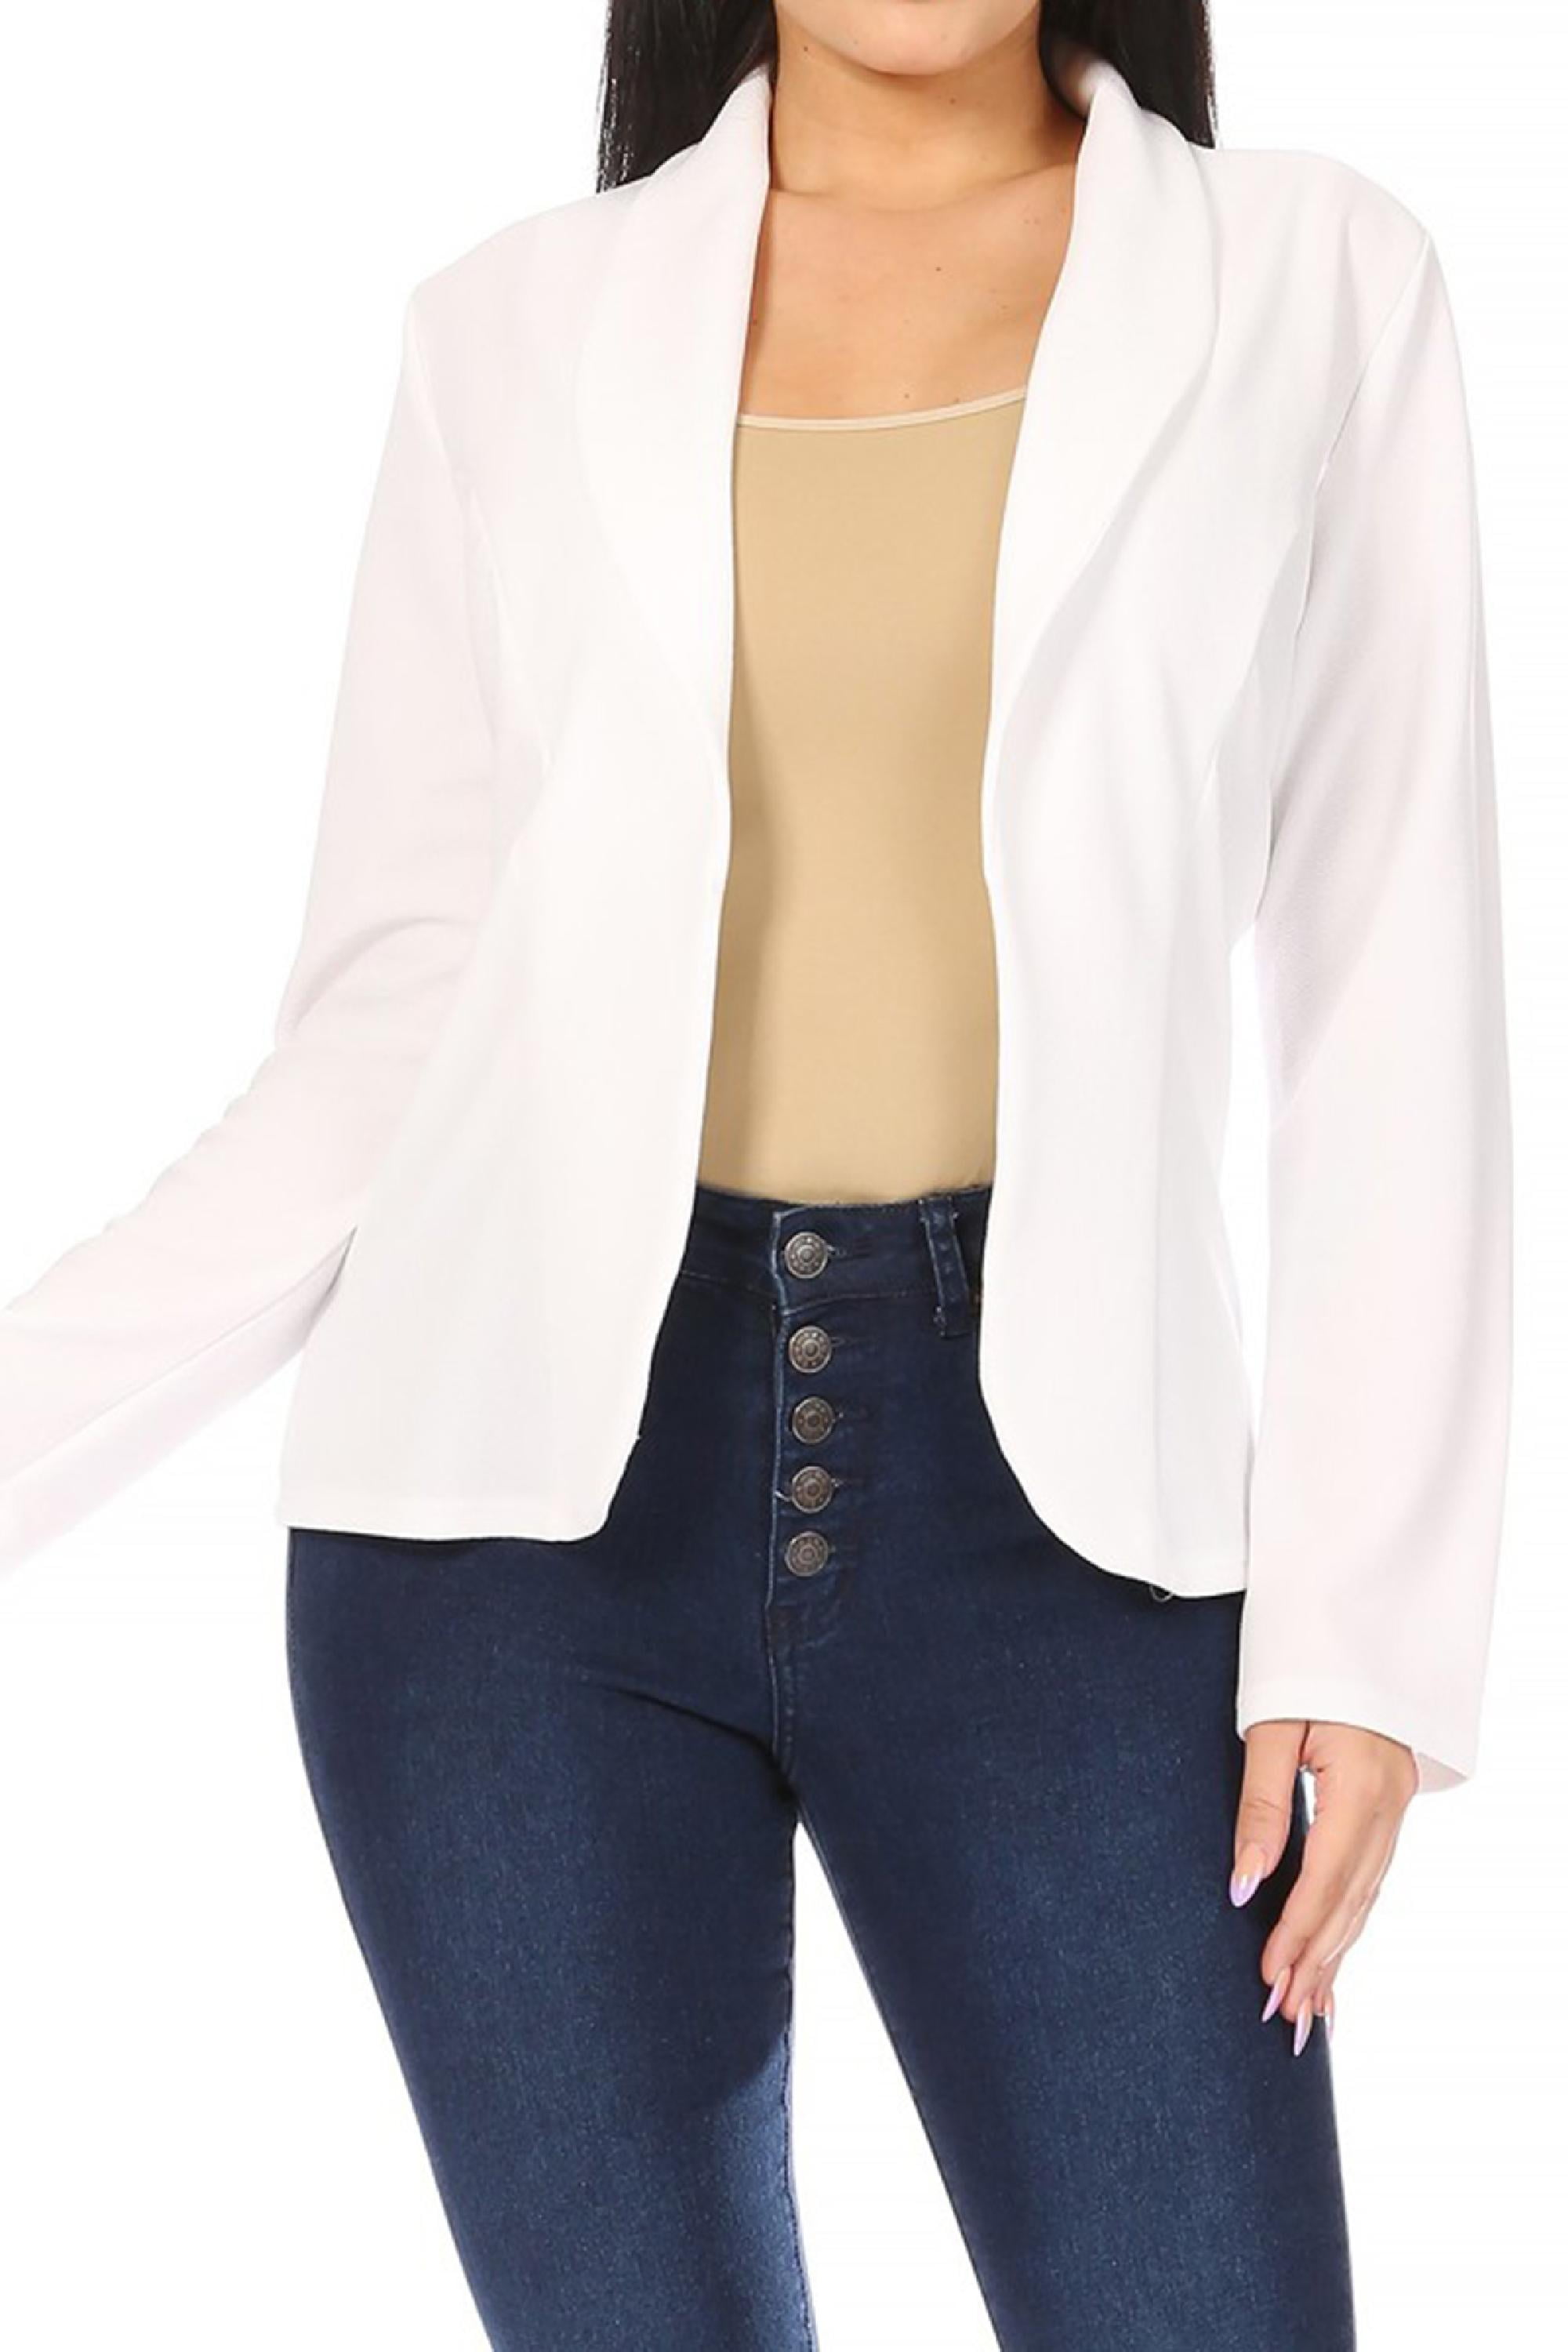 Womens Casual Long Sleeves Open Front Basic Lightweight Solid Blazer Jacket S-3XL 